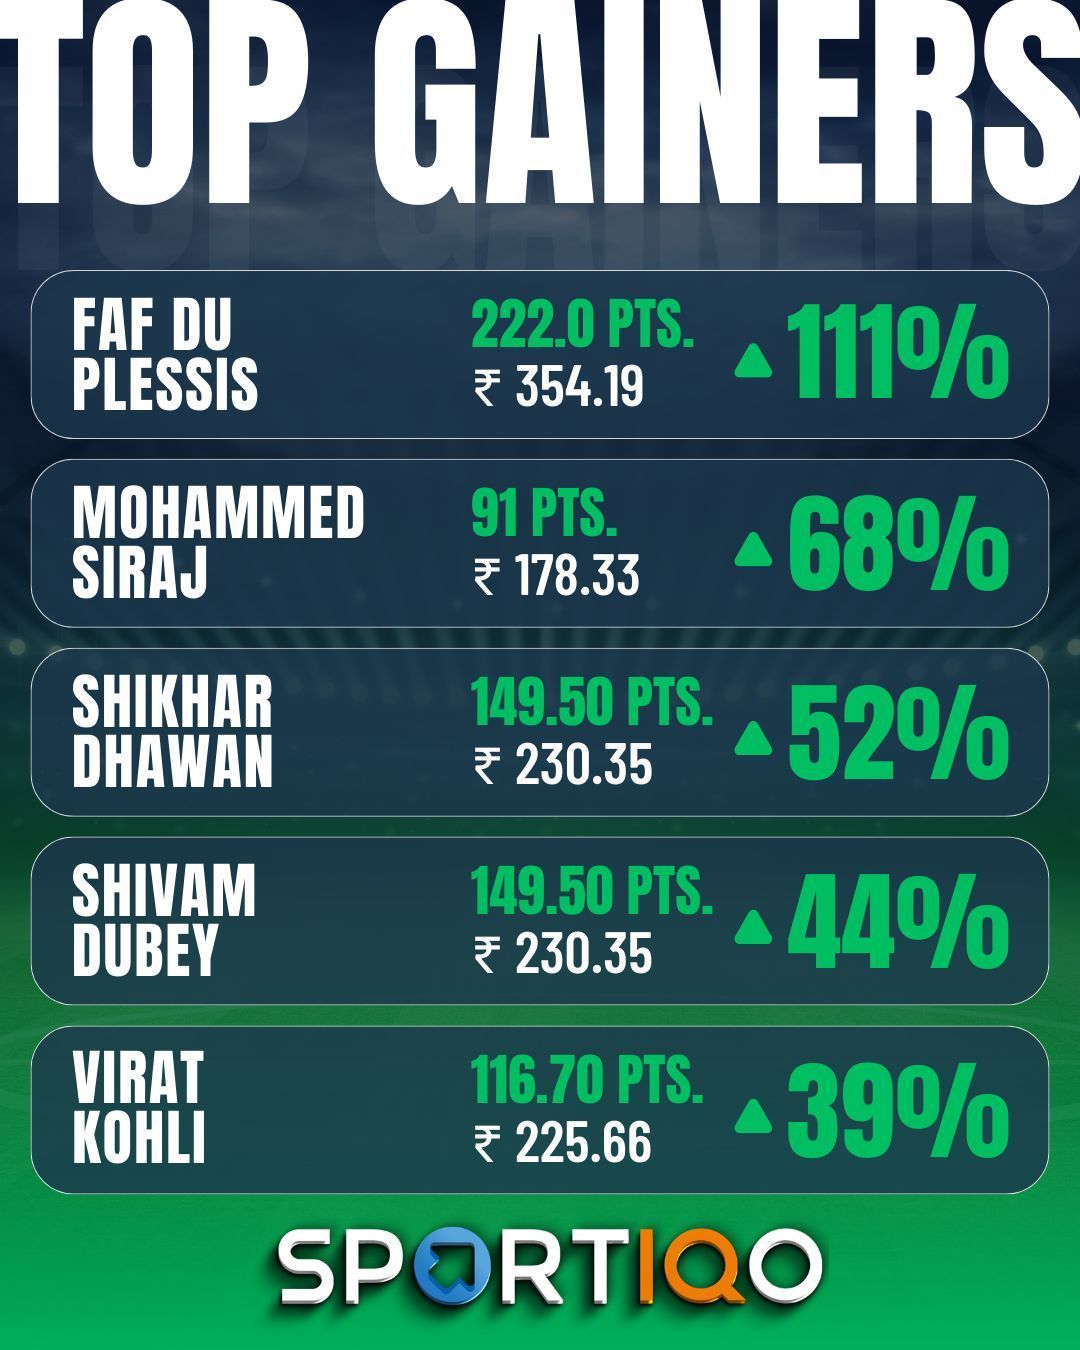 RCB saw plenty of representation in the Top Gainers&#039; list this week.